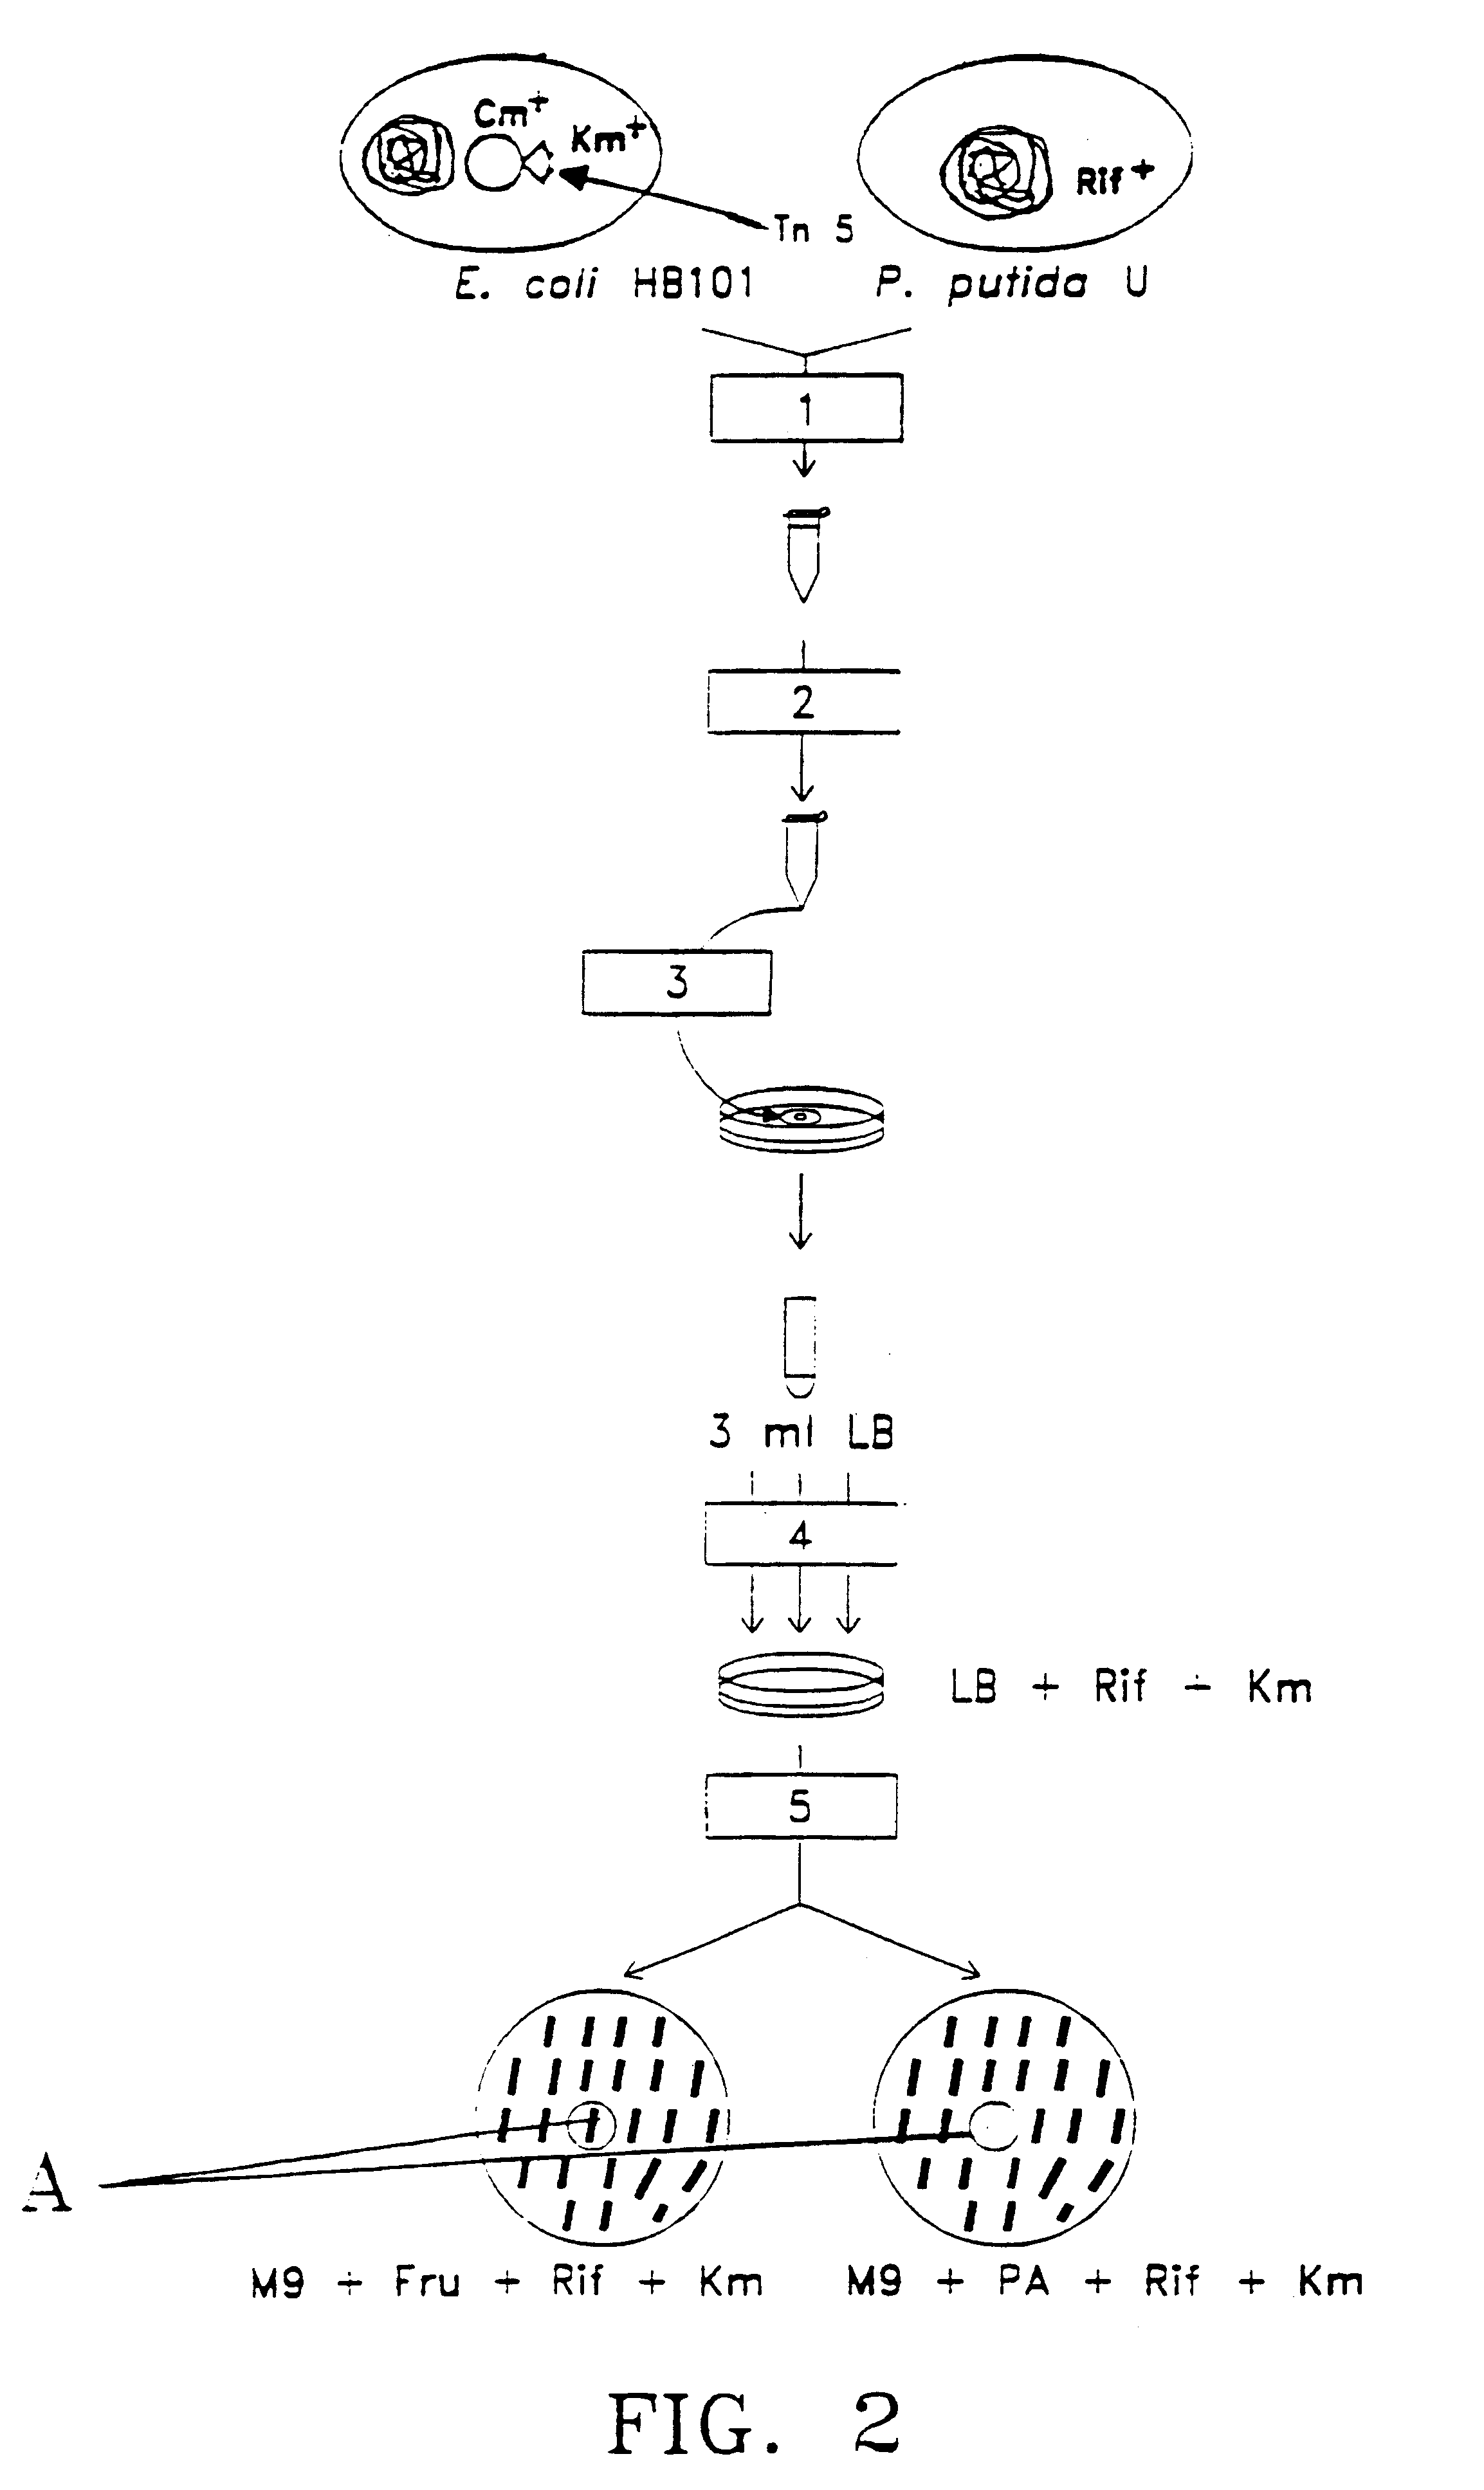 Process for increasing the production of penicillin G (benzylpenicillin) in Penicillium chrysogenum by expression of the PCL gene